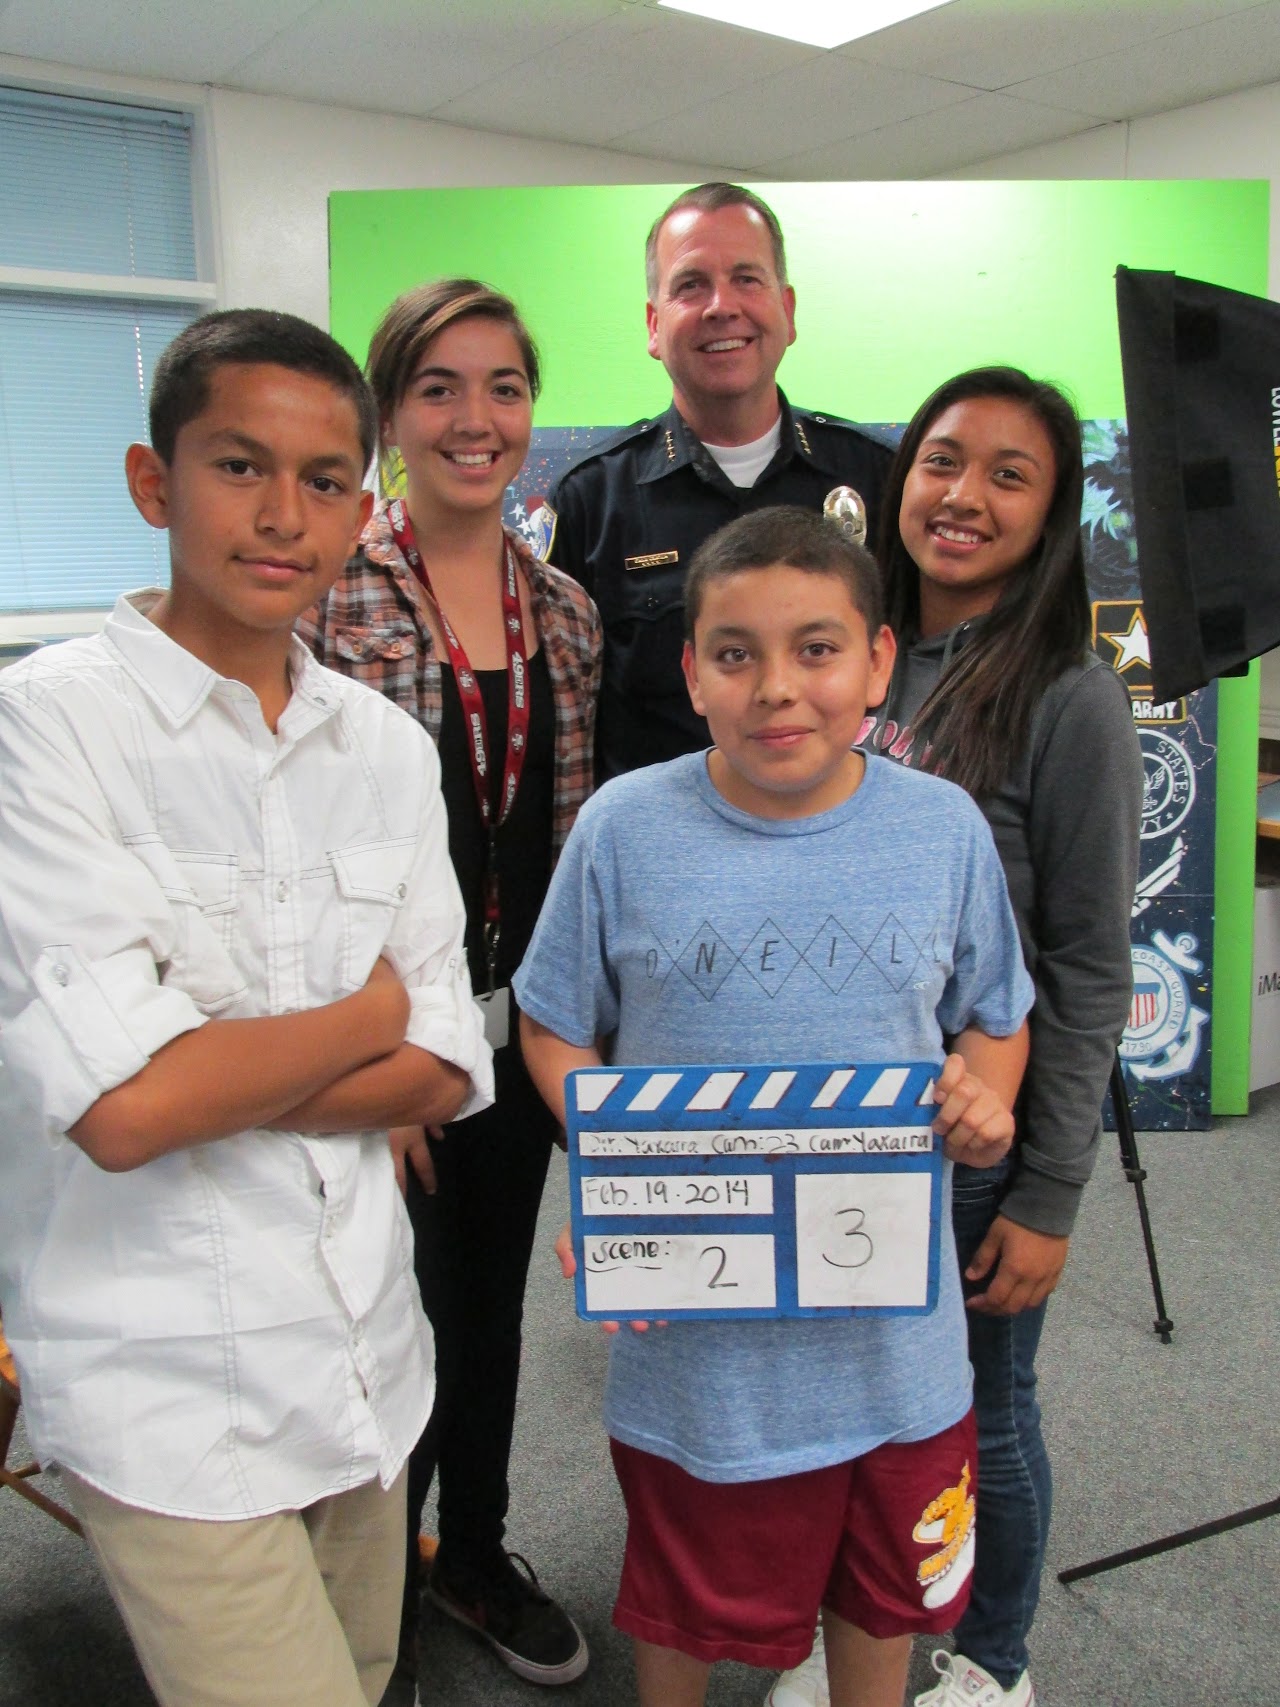 MTV S. VI interviews Escondido's Chief of Police, Chief Carter, for their award winning video Redemption.